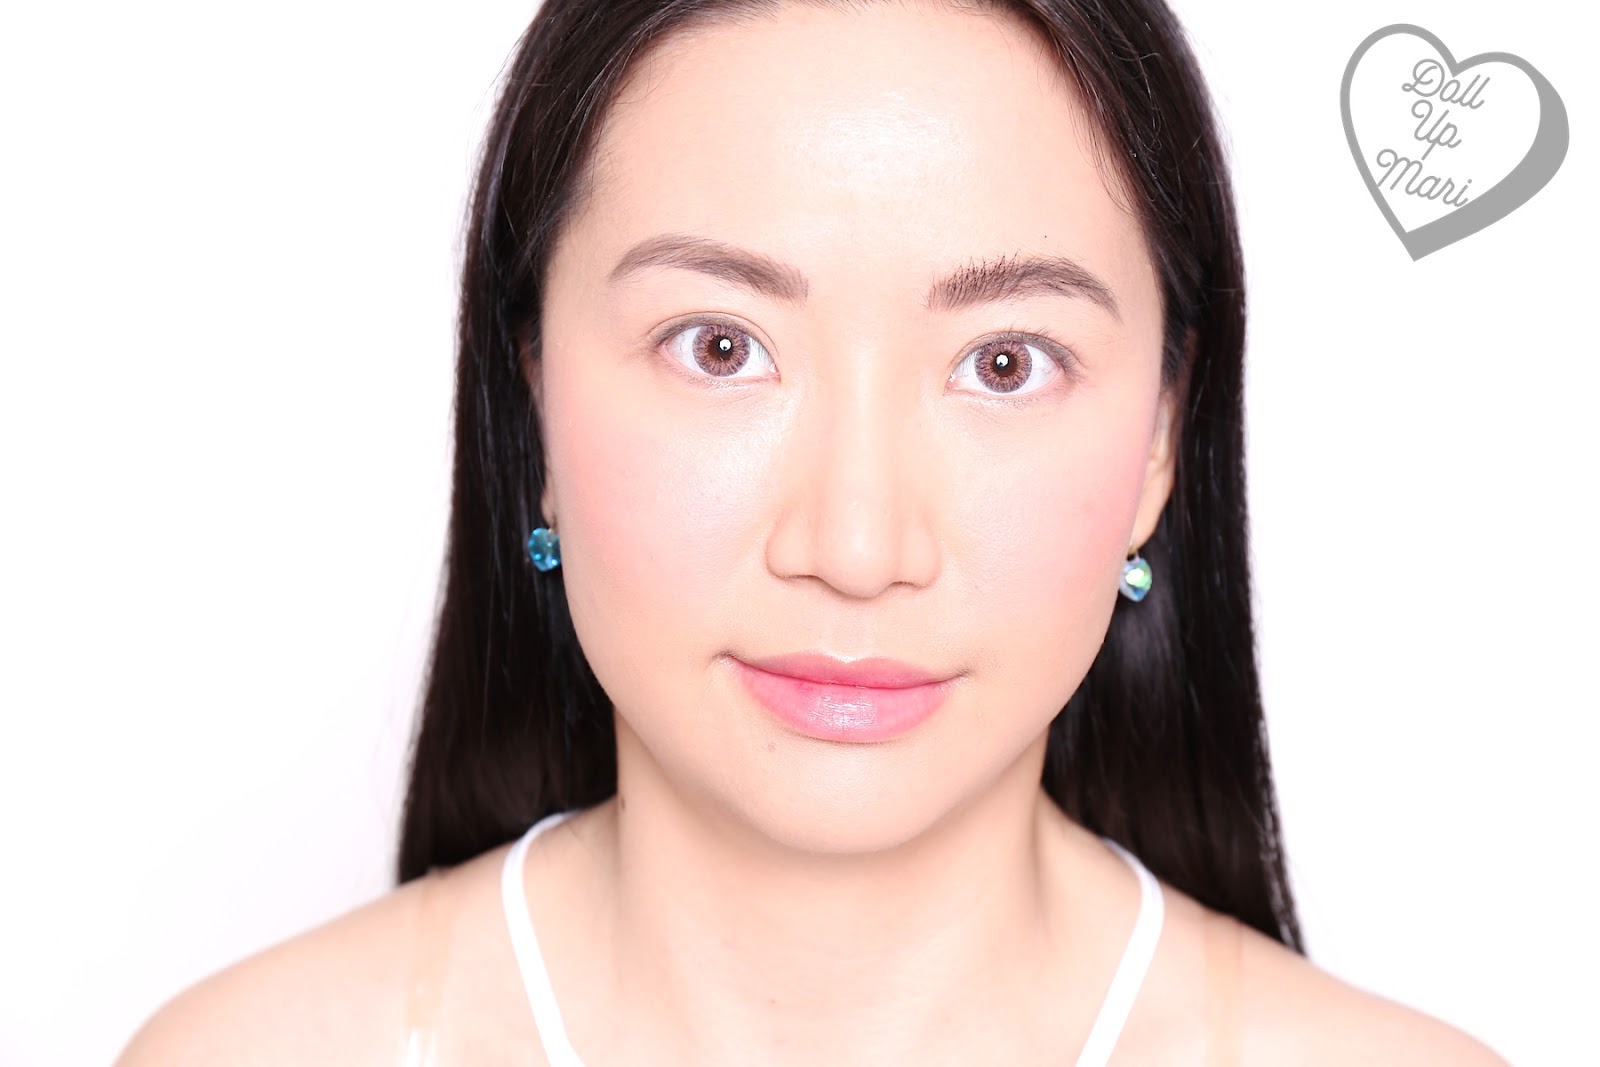 Using Maybelline HyperCurl on the brows